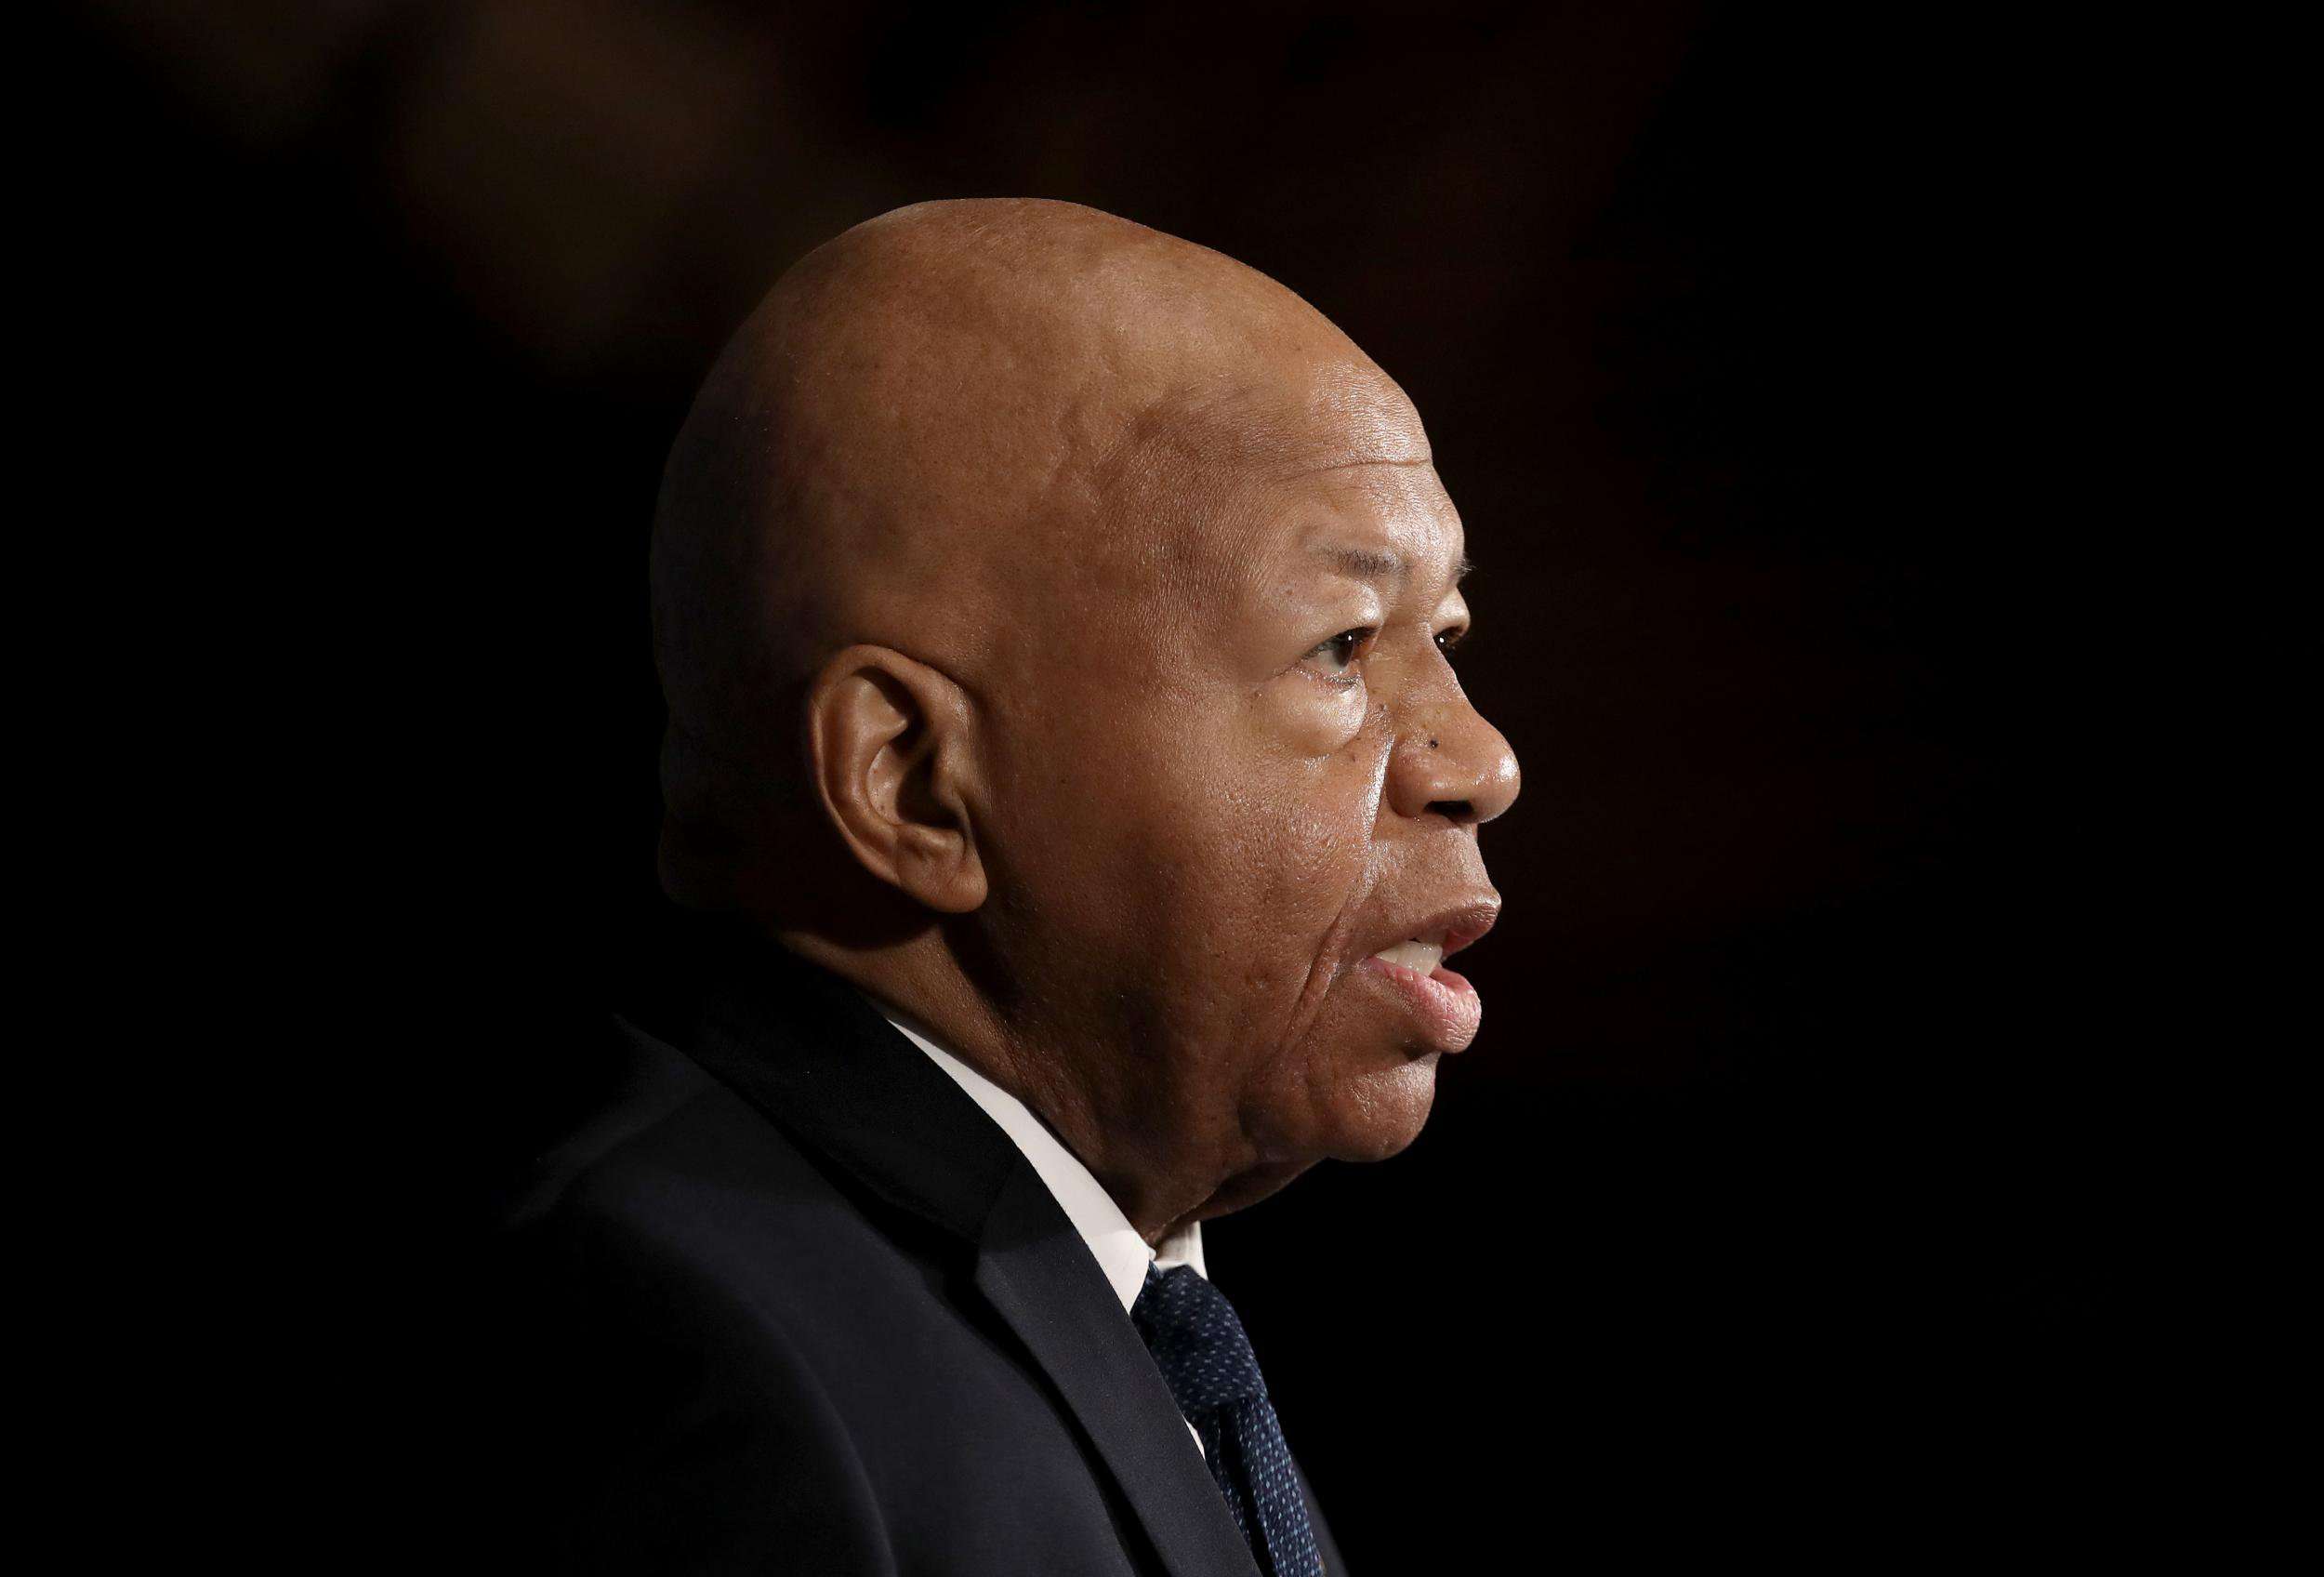 image for Elijah Cummings 'signed subpoenas from his hospital bed' for Trump impeachment before his death